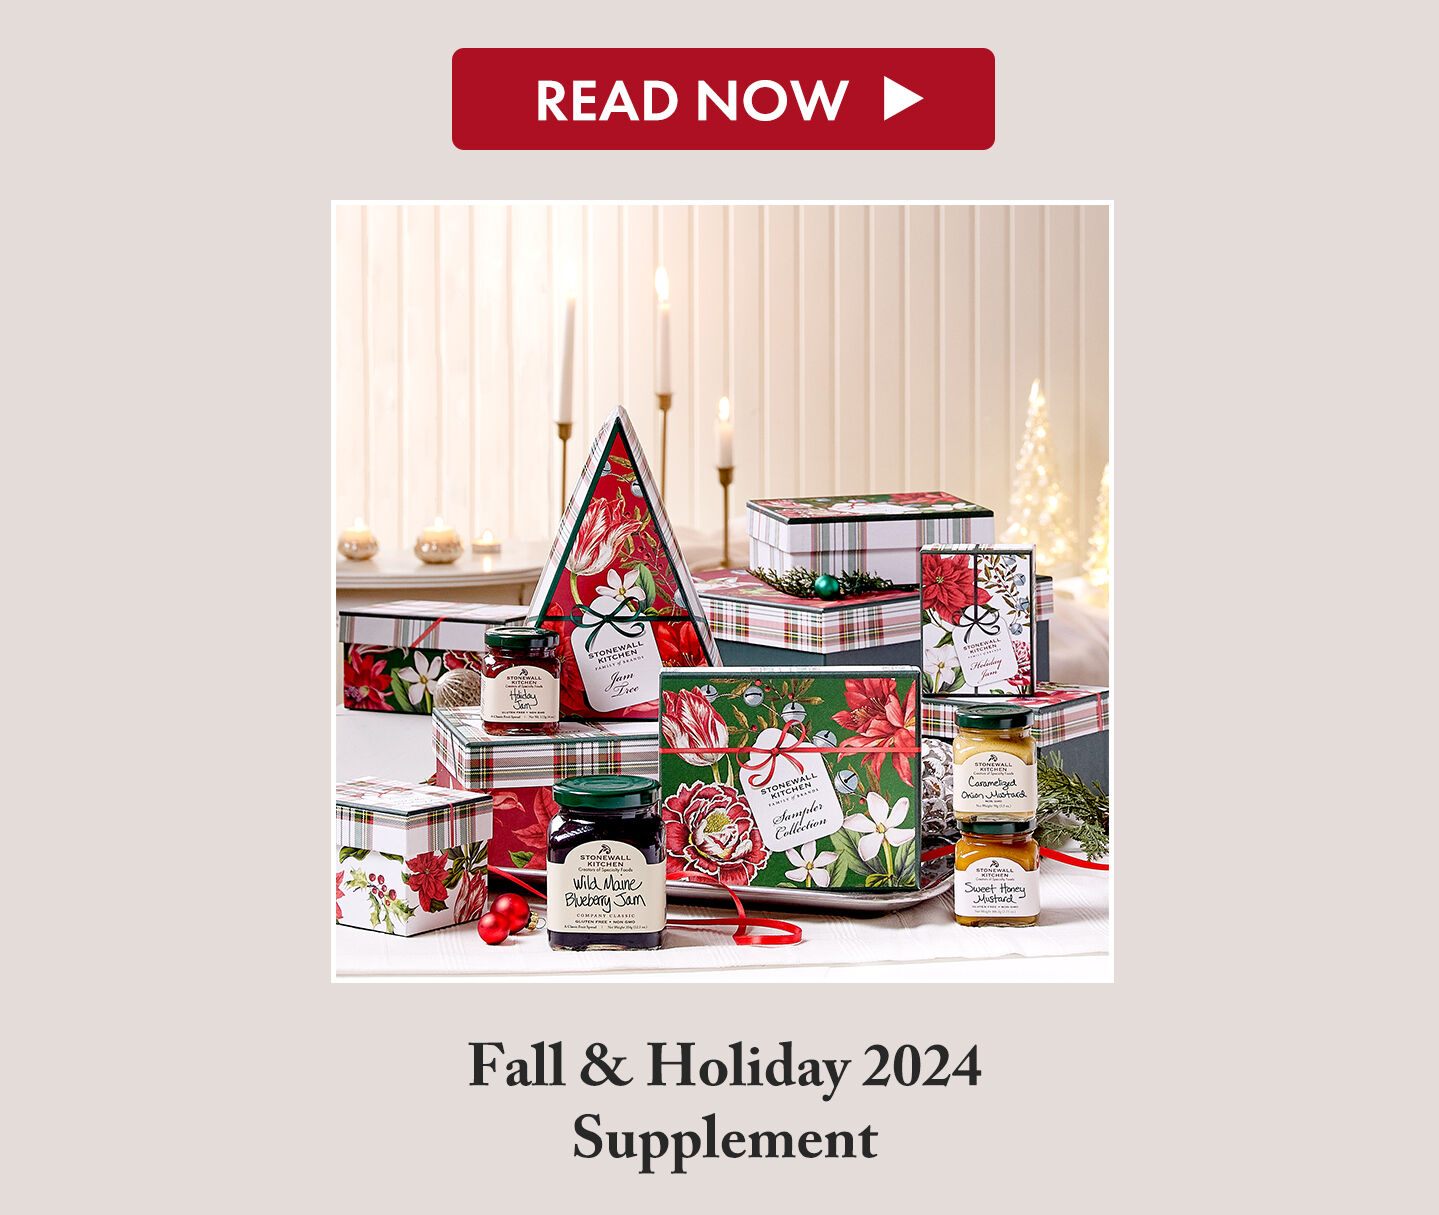 Fall & Holiday 2024 Supplement - Read Now